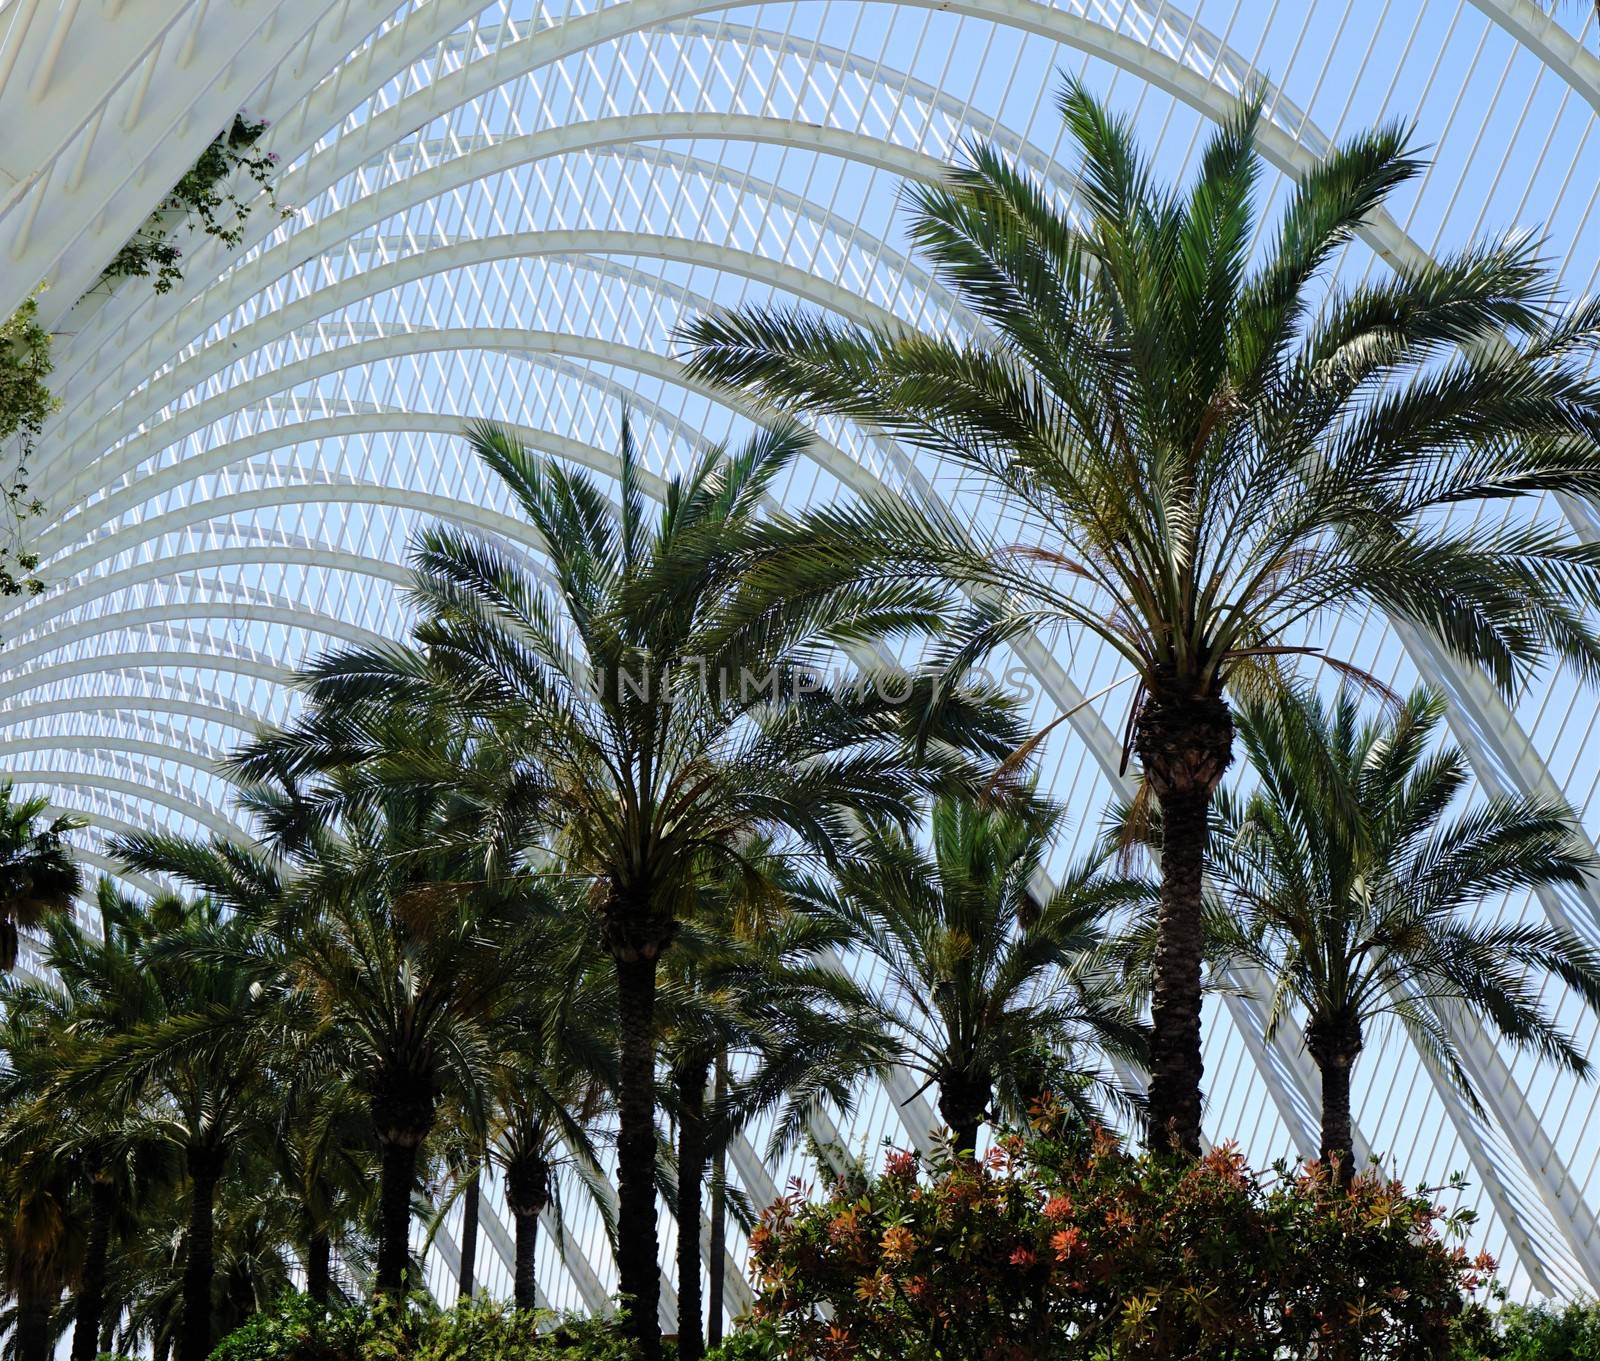 Interior view of l'Umbracle in the City of Arts and Sciences, Valencia by pisces2386